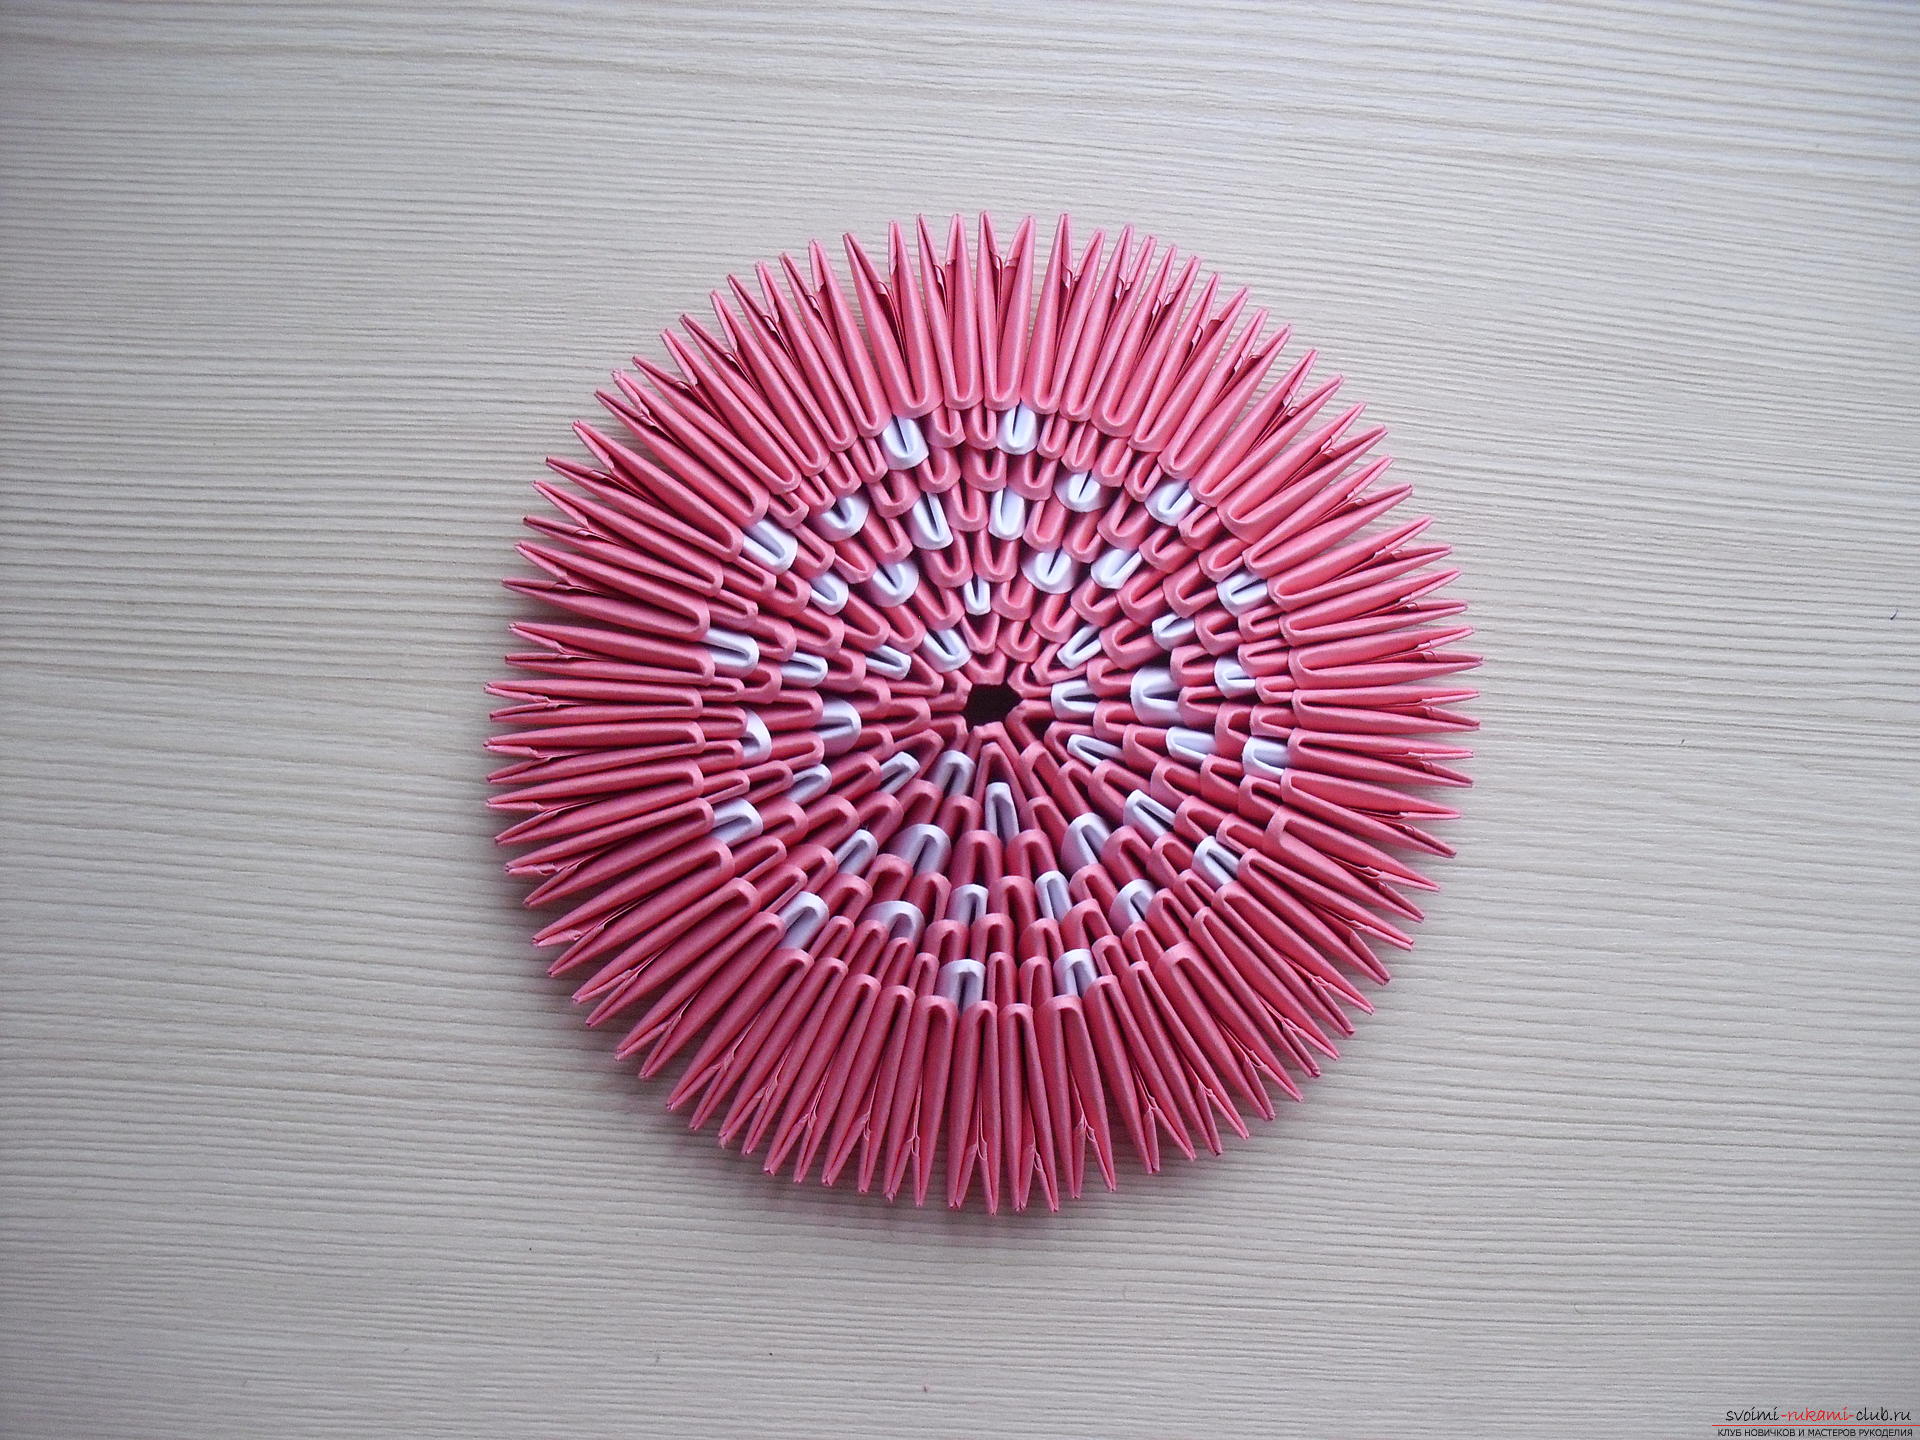 This master class will teach you how to make a modular origami - a fly agaric mushroom .. Photo # 11